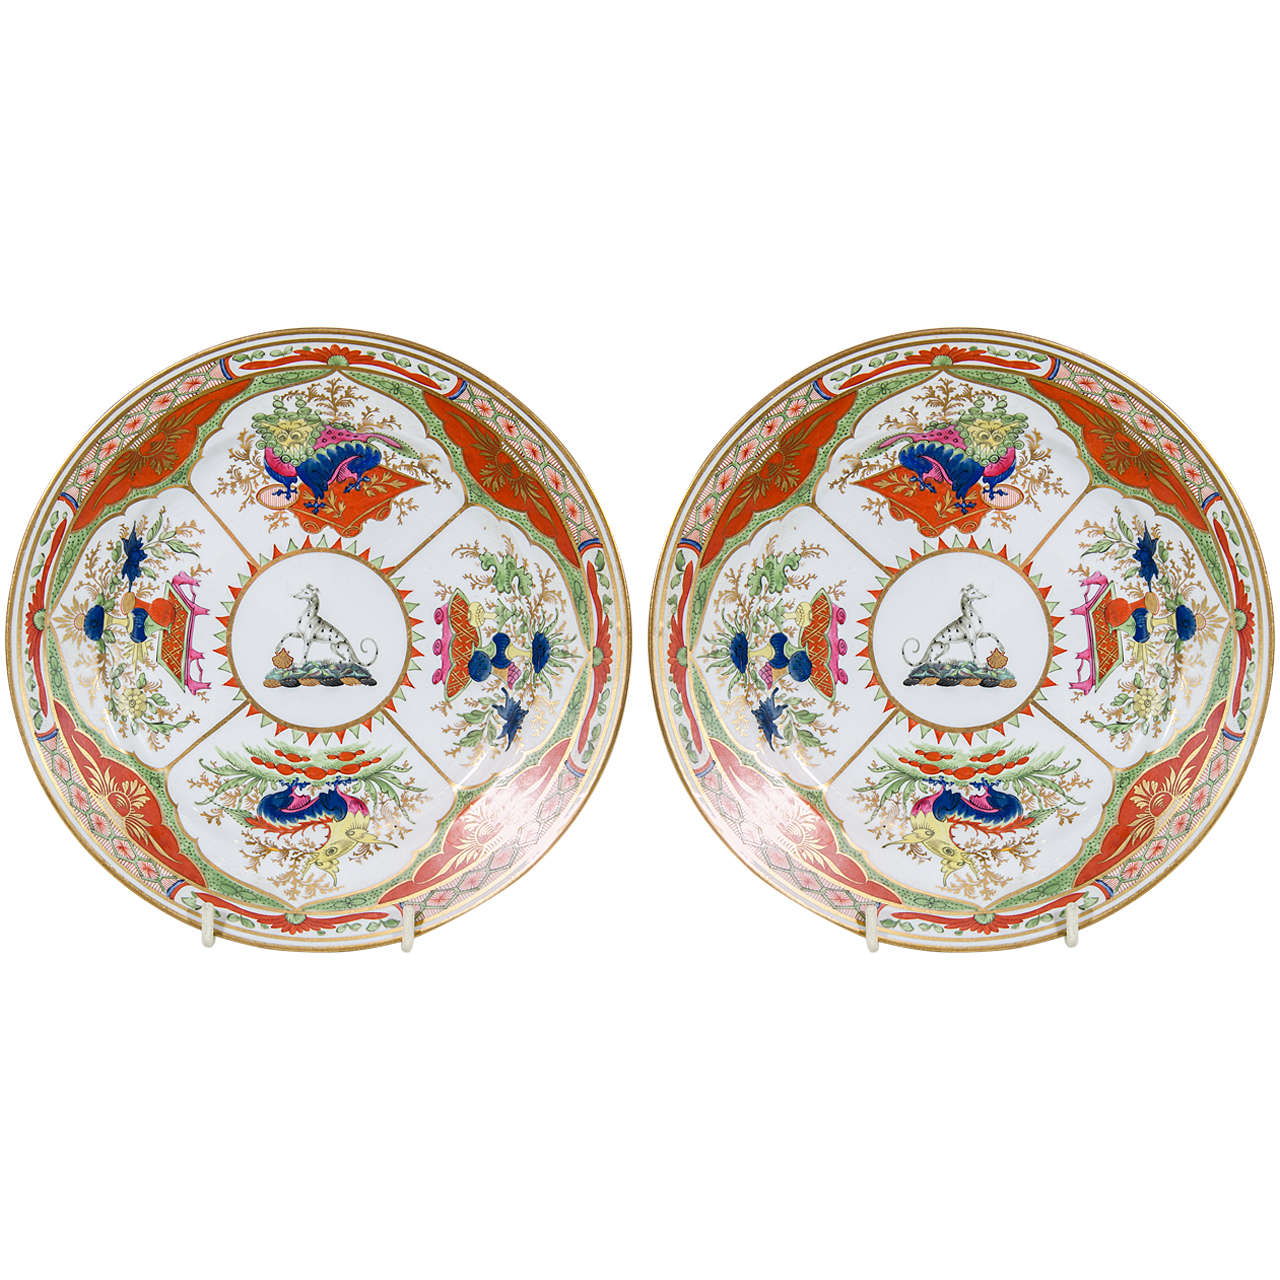 A Pair of Worcester "Bengal Tiger" Pattern Crested Dishes with Greyhound